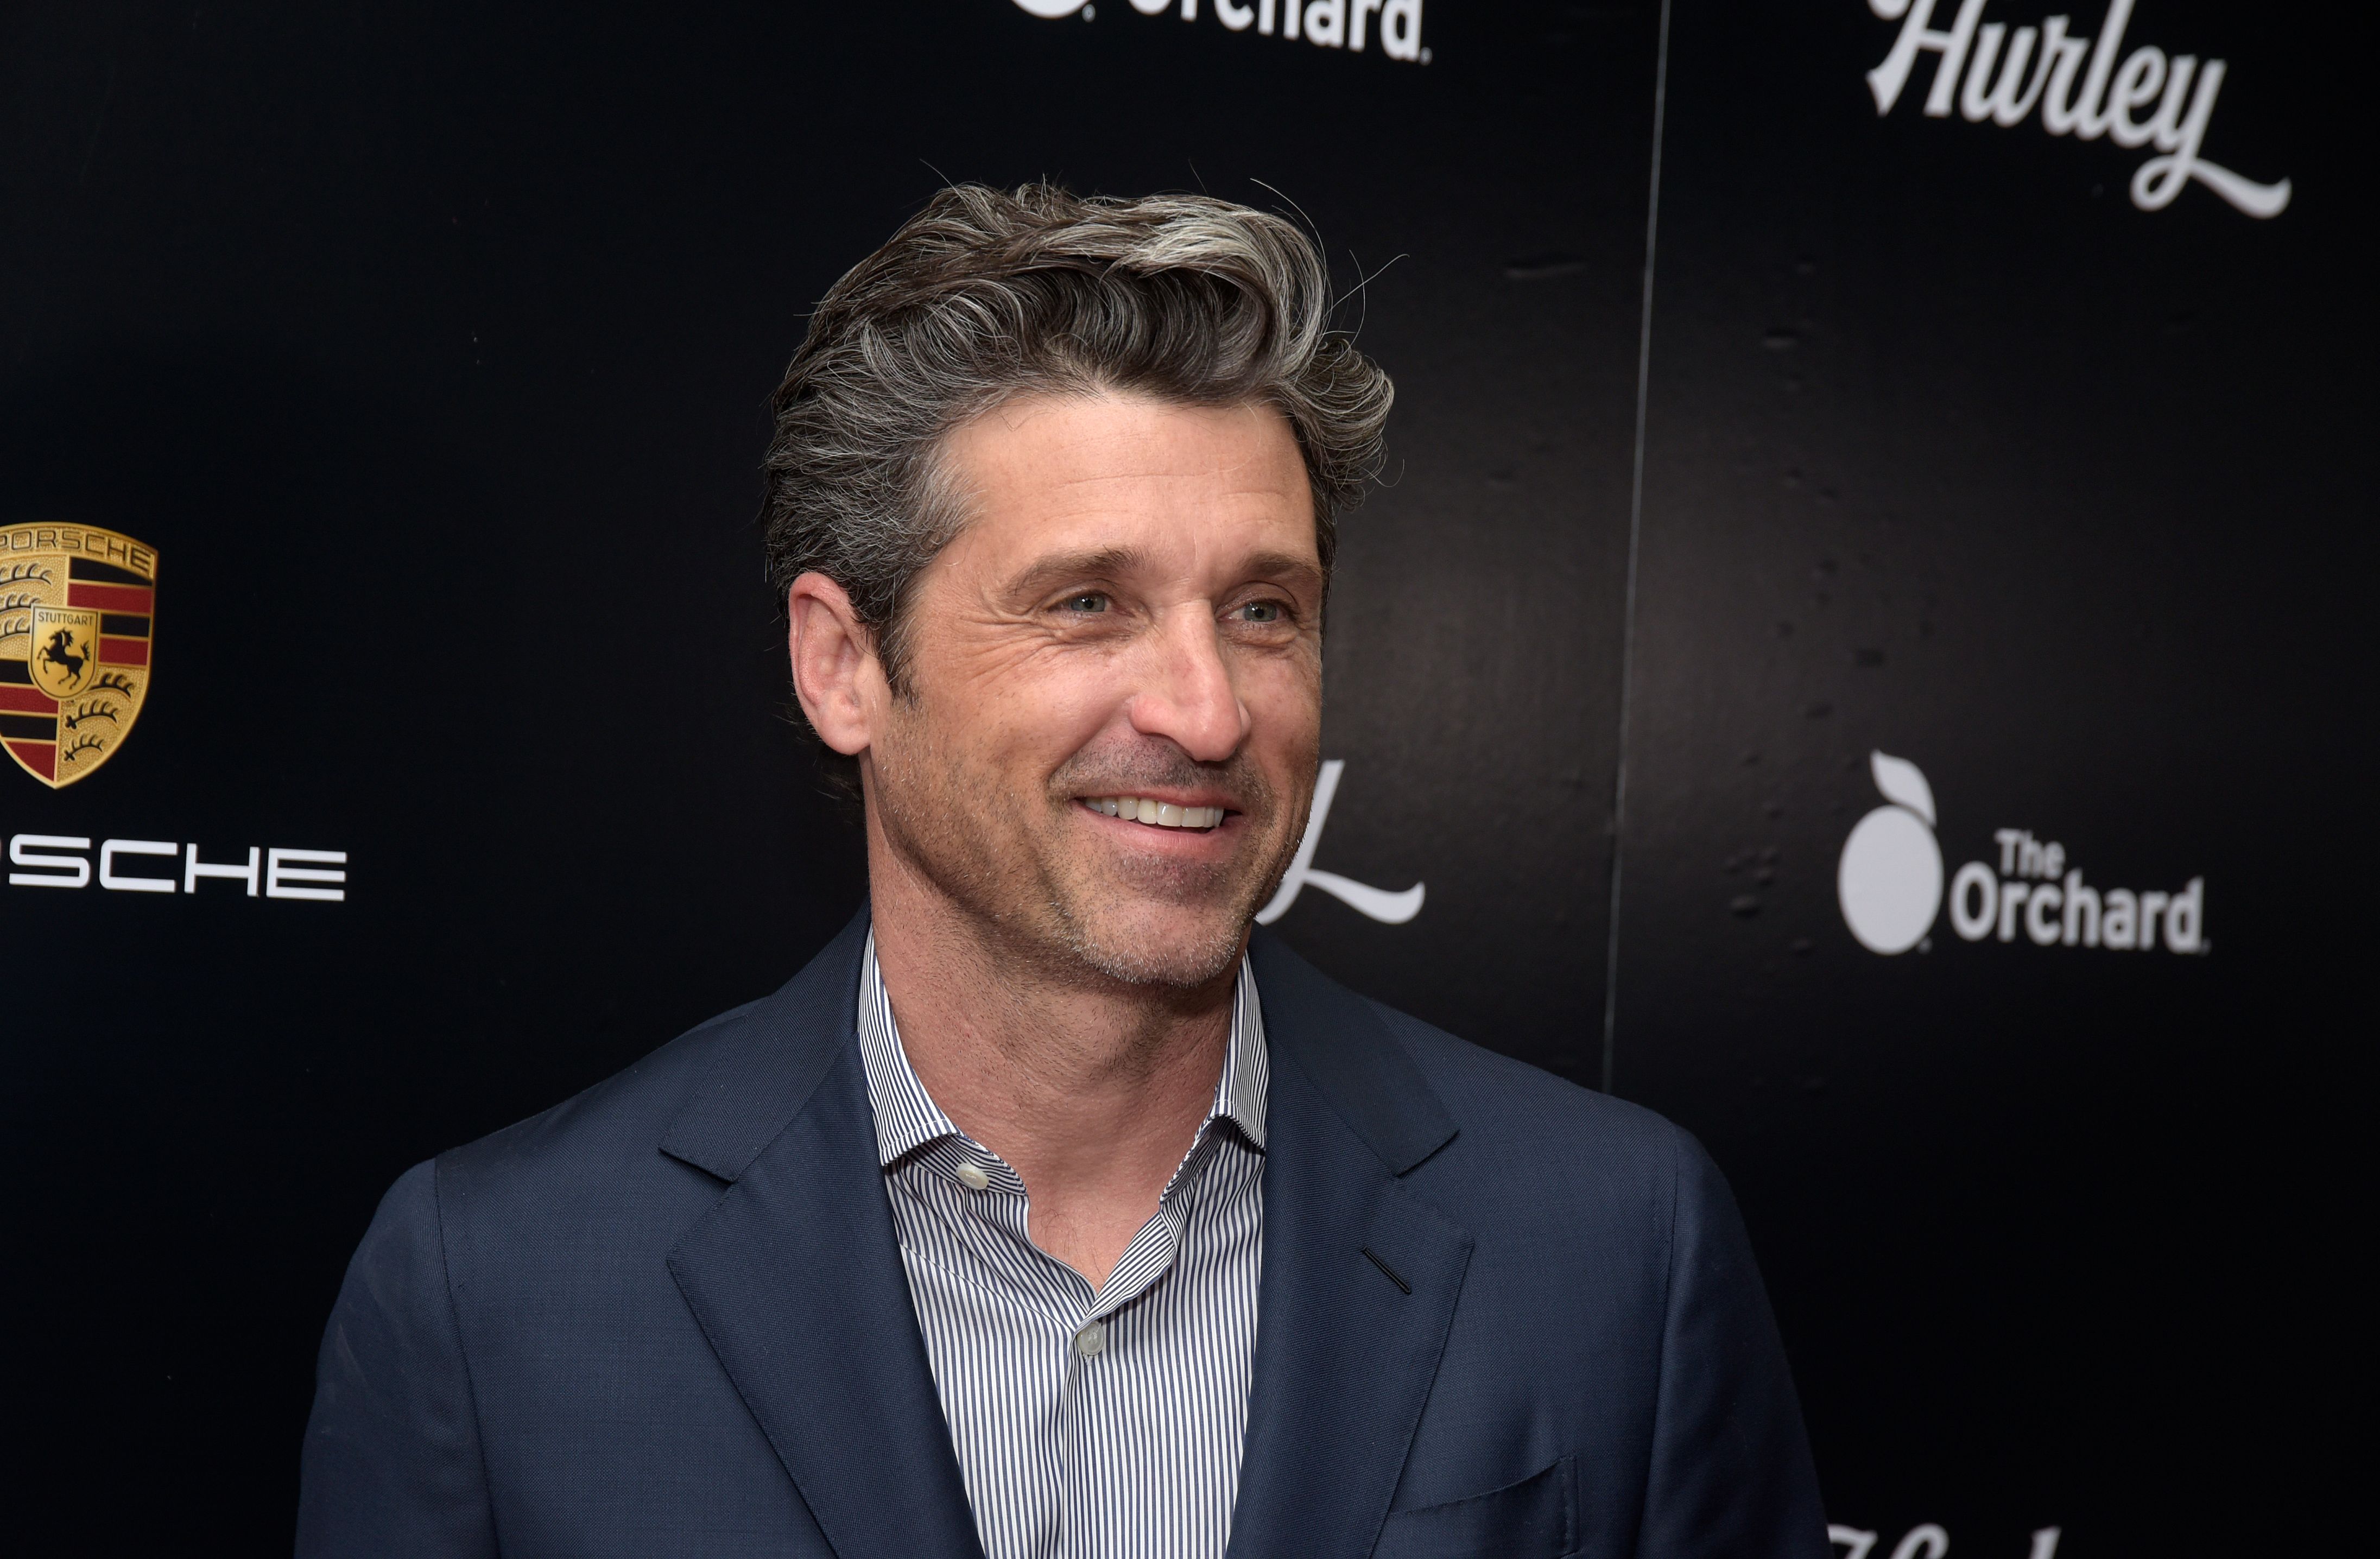 Patrick Dempsey at the Los Angeles premiere of "Hurley" at Petersen Automotive Museum on March 18, 2019 | Photo: Getty Images